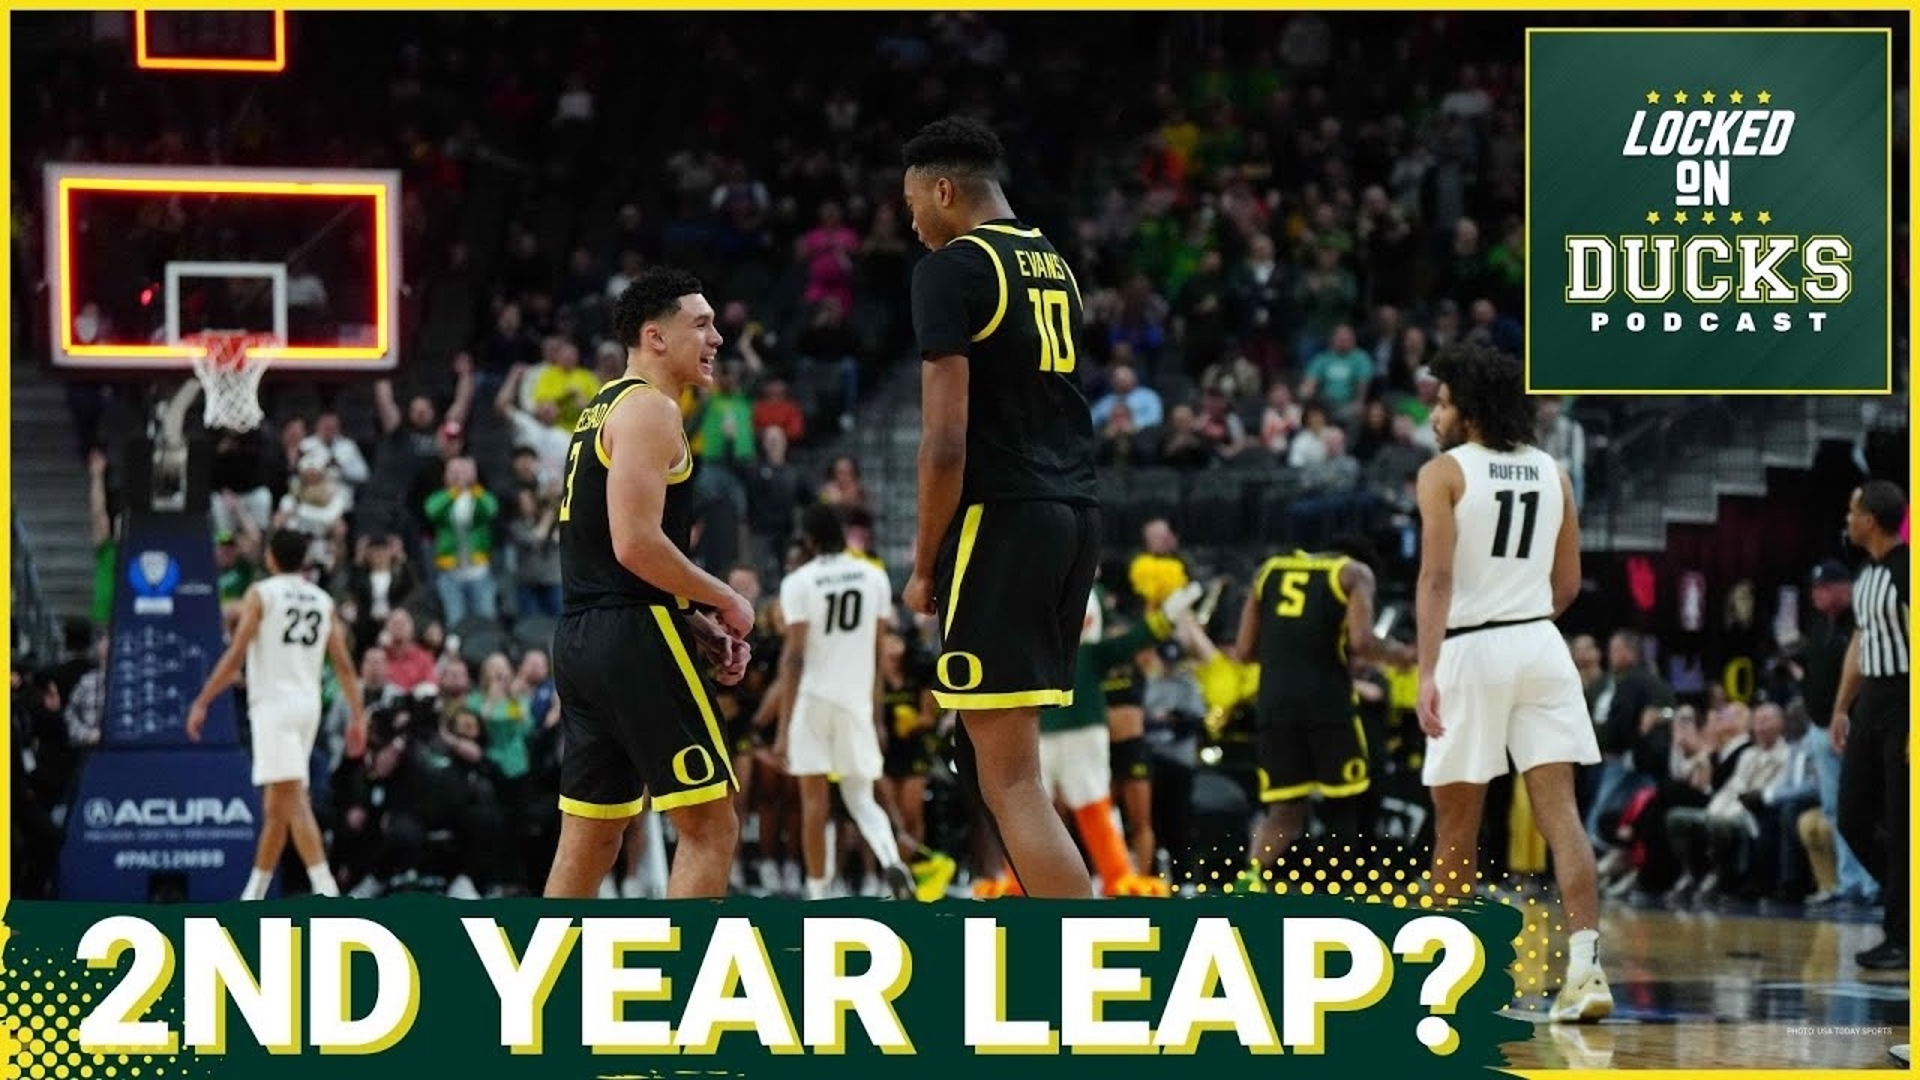 Dana Altman's transfers have made plenty of noise this offseason to set the stage for a strong transition into the Big 10.